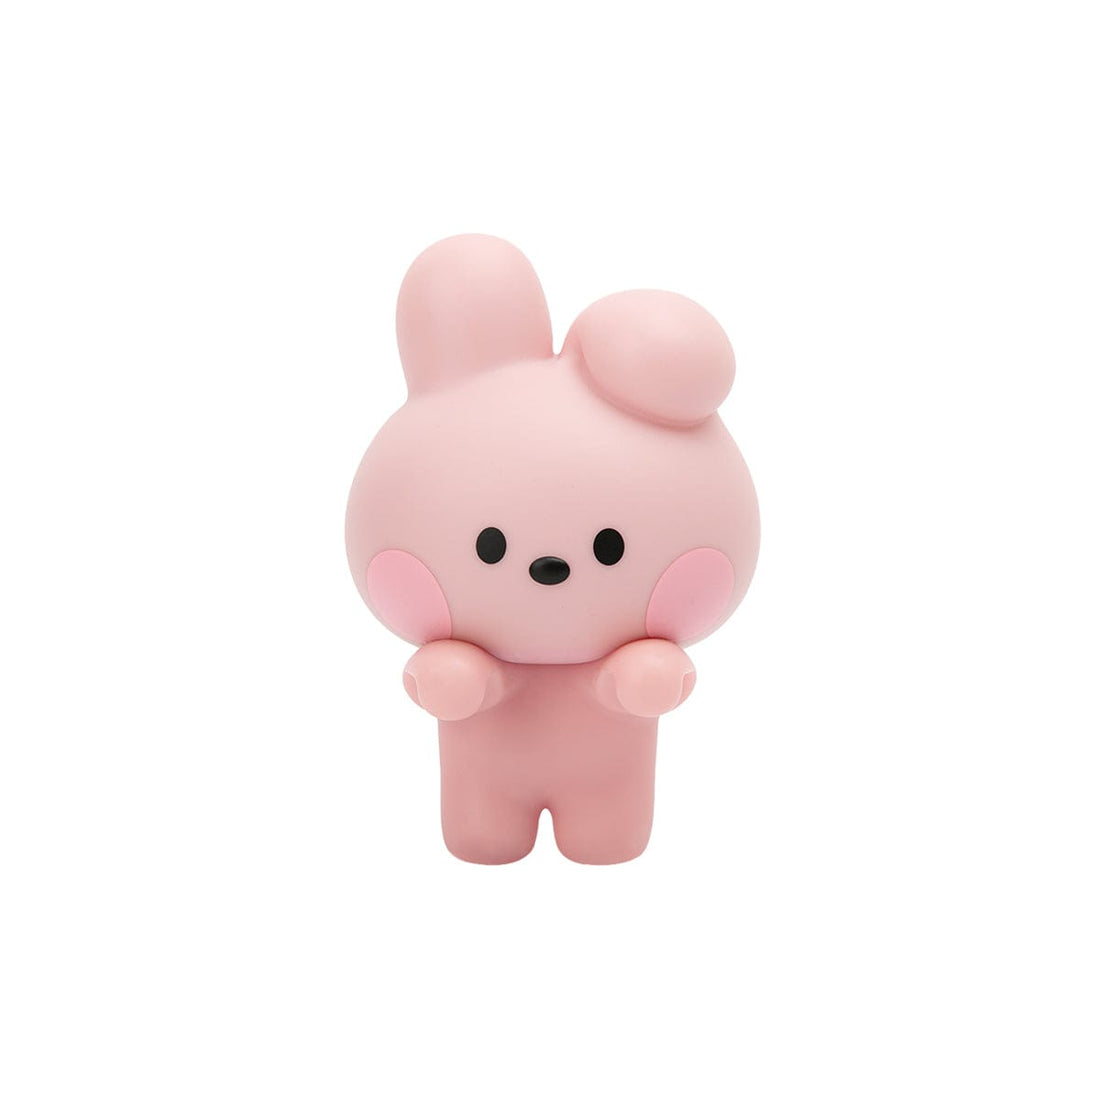 LINE FRIENDS LIVING COOKY BT21 COOKY minini MONITOR AIR REFRESHNER FIGURINE